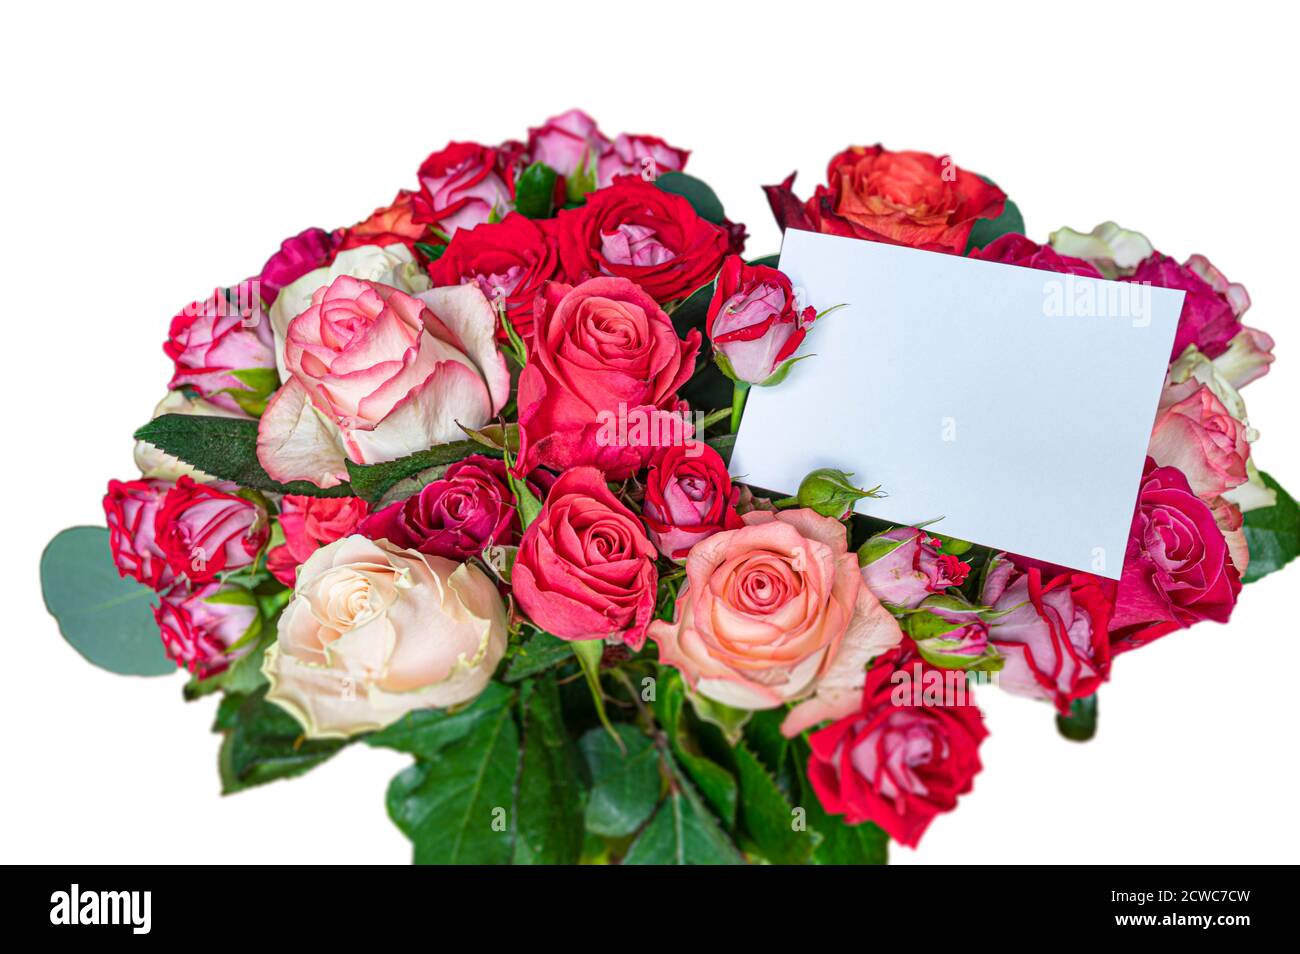 Happy Birthday Card On Flower Bouquet With Roses And Pink Ribbon On Marble  Table Stock Photo, Picture and Royalty Free Image. Image 190520062.